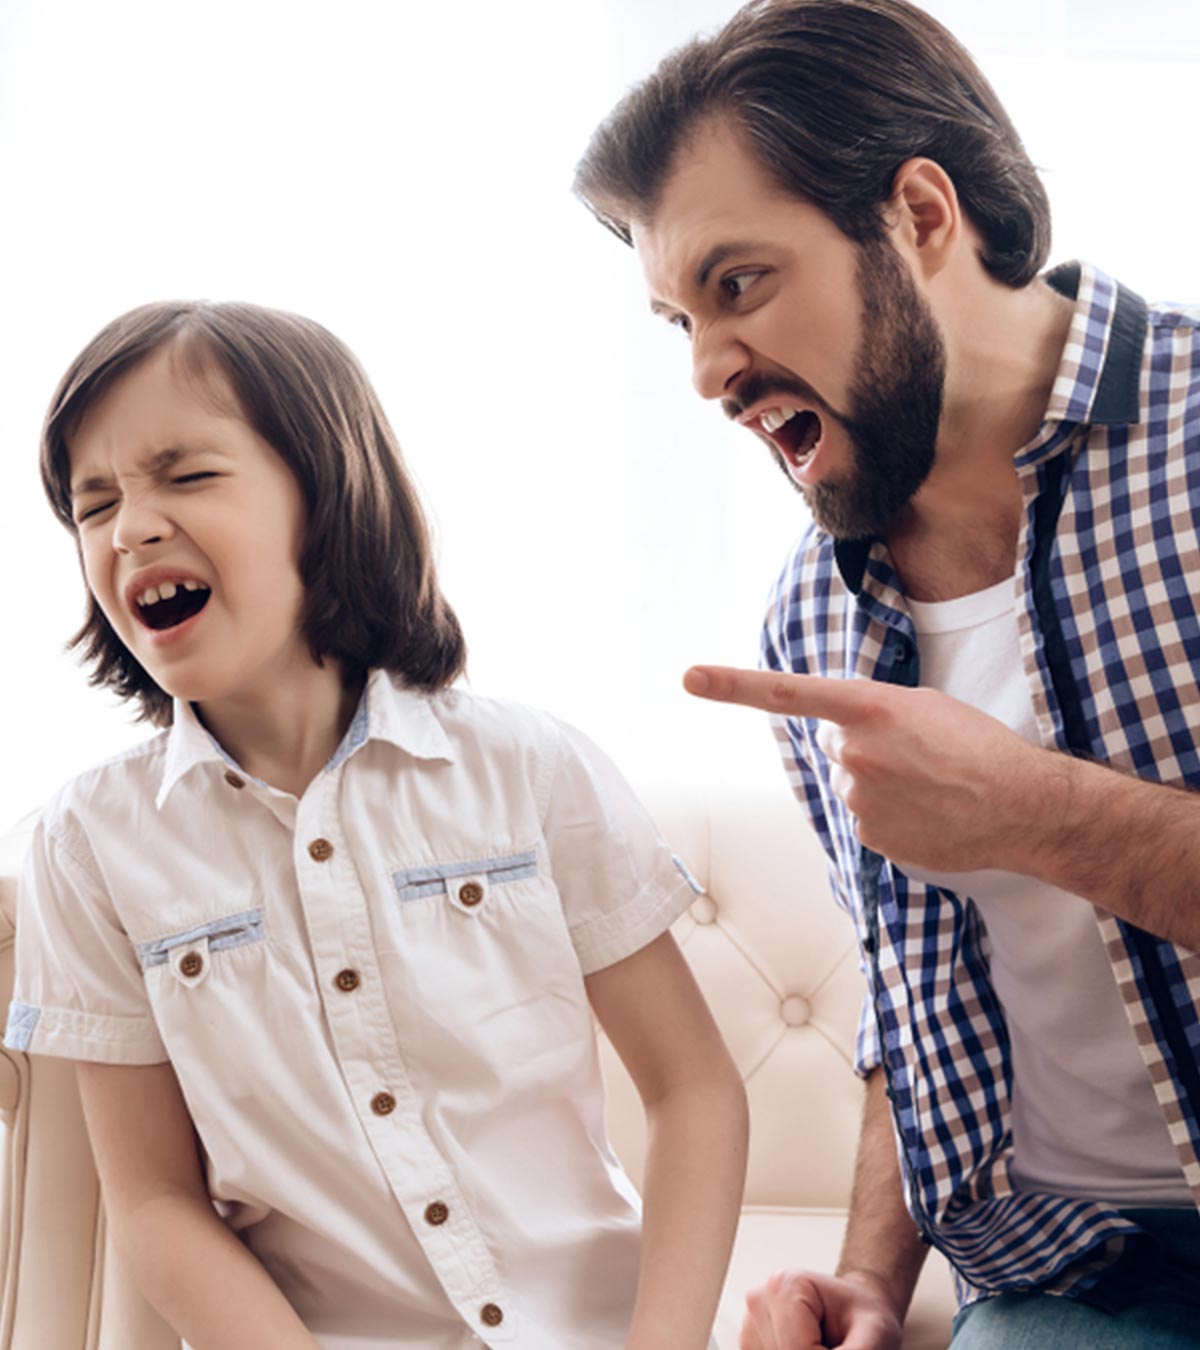 4 Psychological Effects Of Yelling At Kids & 12 Ways To Handle